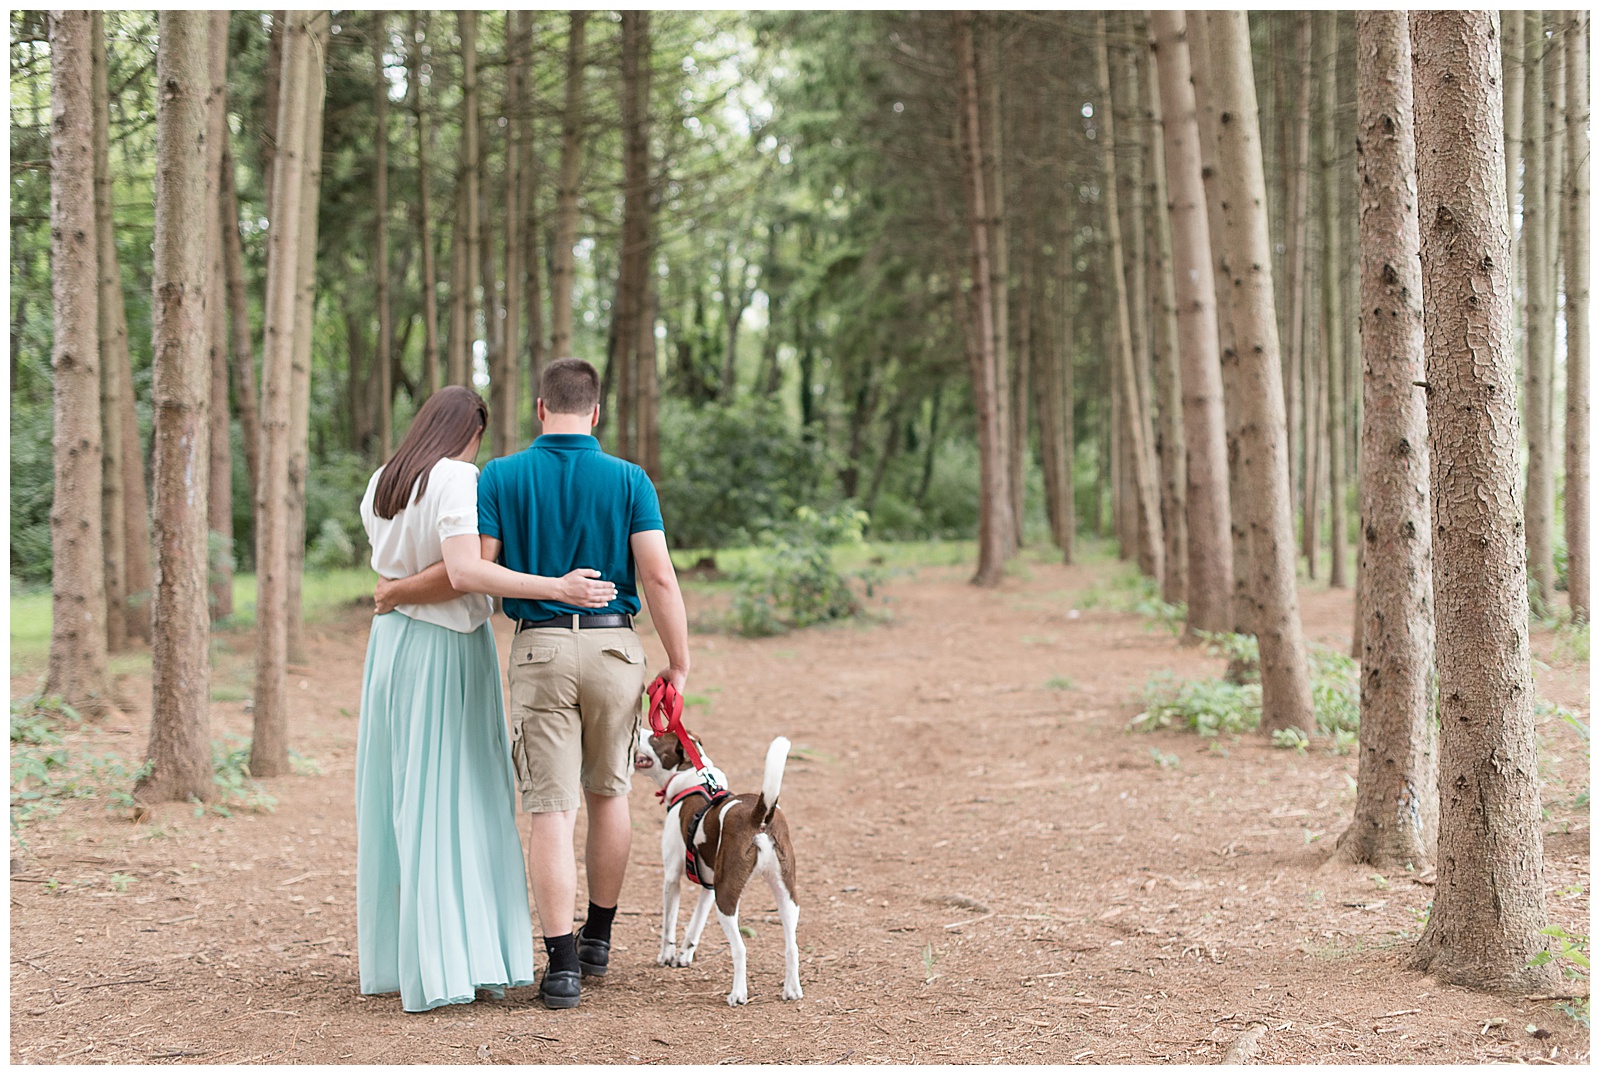 the couple is on the left side of the photo hugging with arms wrapped behind each other with their backs to the camera and the girl is on the left and the guy is on the right and they are looking down at their dog which is to the right of the guy as he holds the dog's leash in his right hand on the path with the rows of evergreen trees surrounding them at Overlook Park in Lancaster, PA